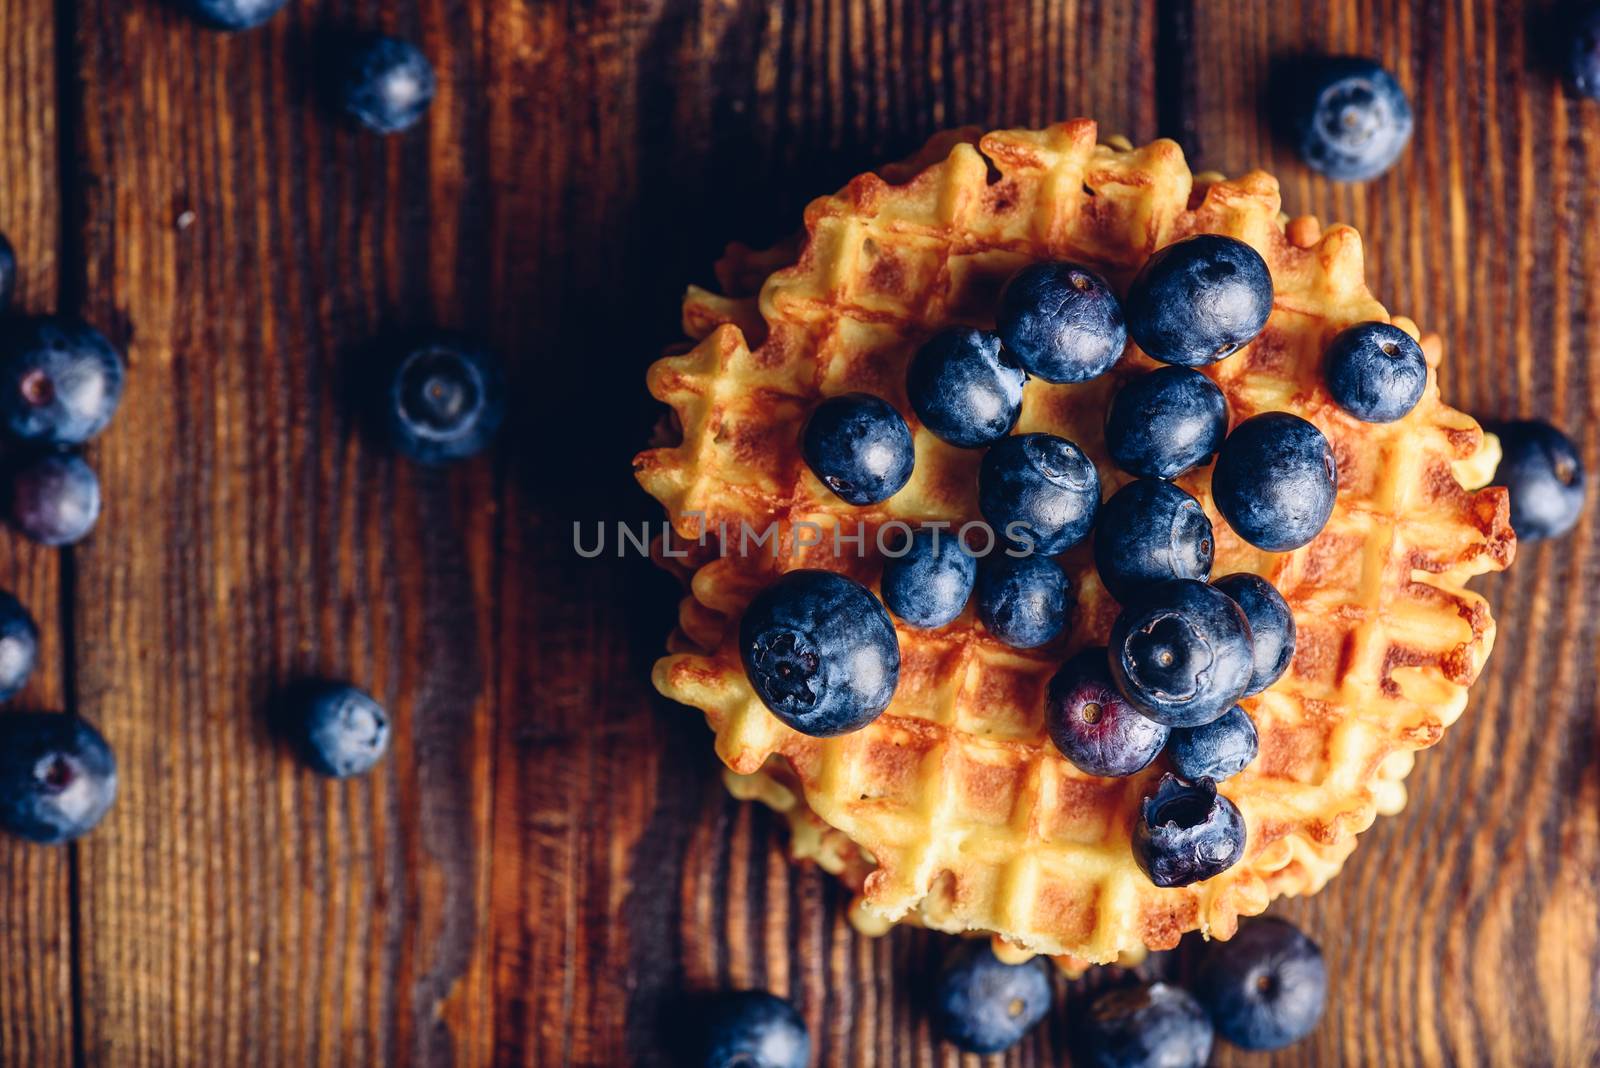 Blueberries on the Top of the Waffle and Other Scattered on Wooden Background. Copy Space on the Left.